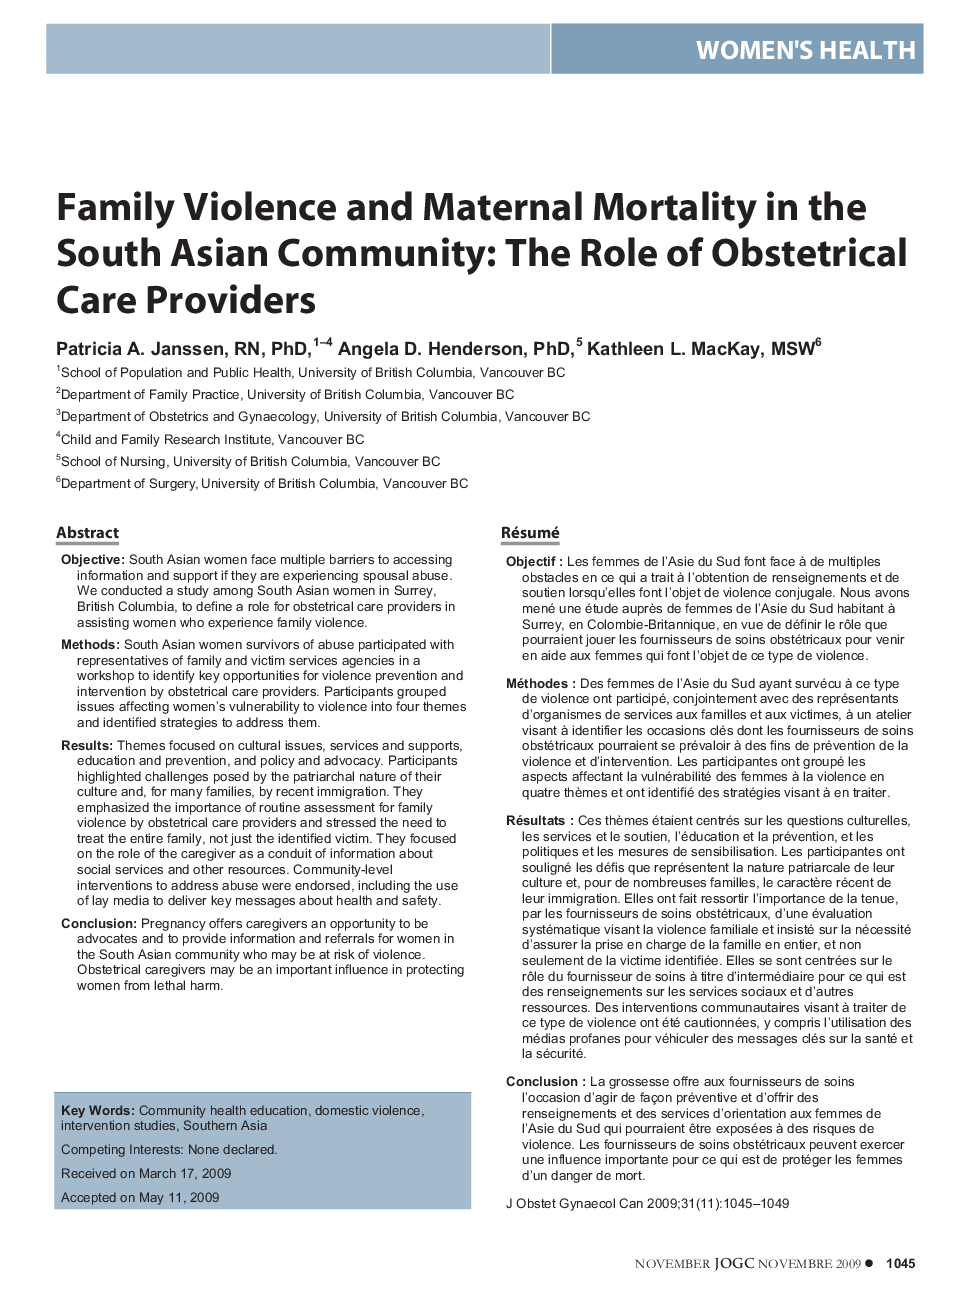 Family Violence and Maternal Mortality in the South Asian Community: The Role of Obstetrical Care Providers